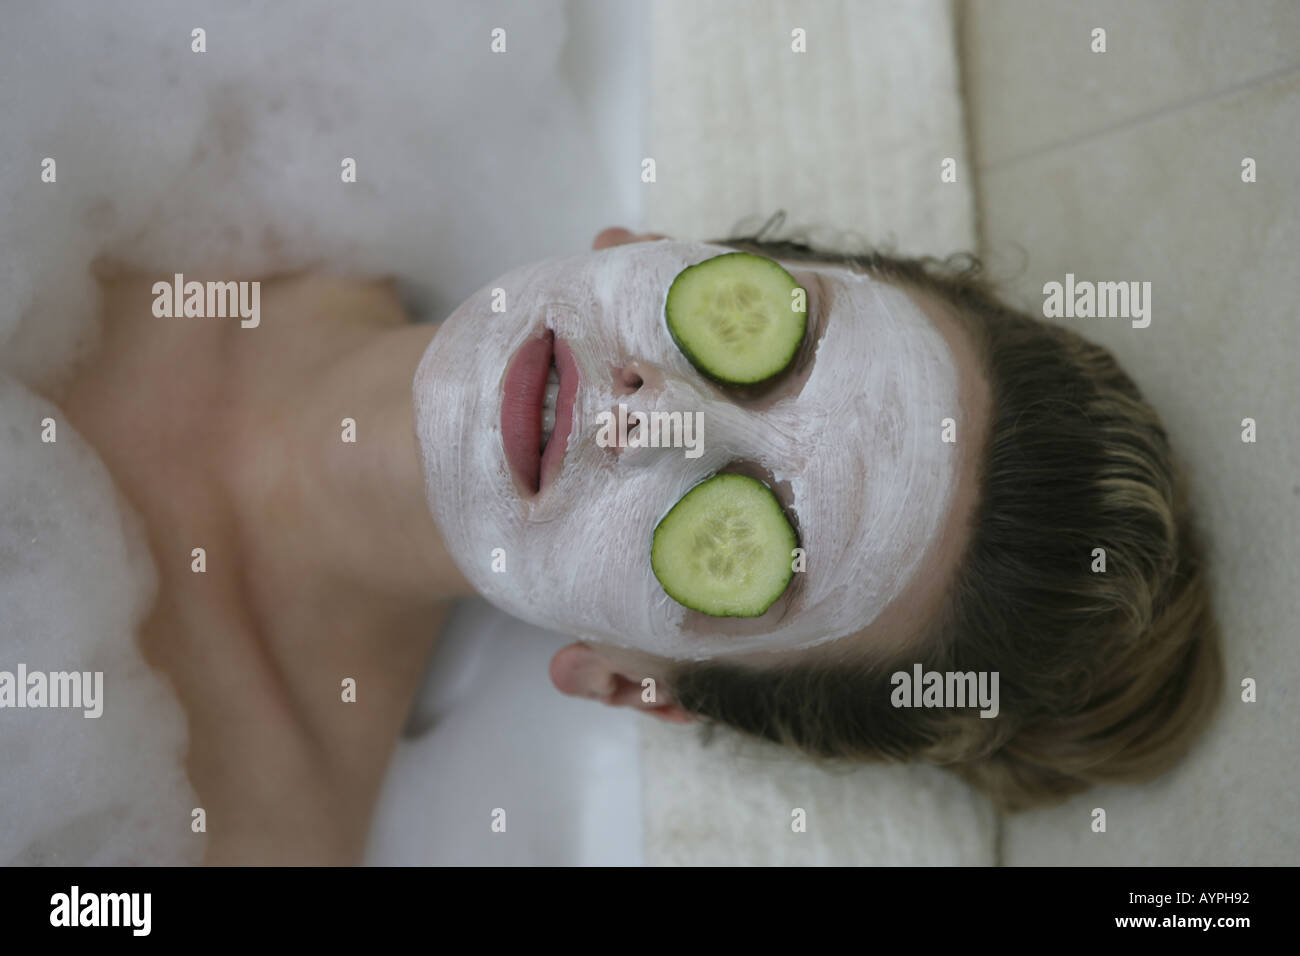 A woman relaxing in bathtub with cucumber slices on her eyes Stock Photo